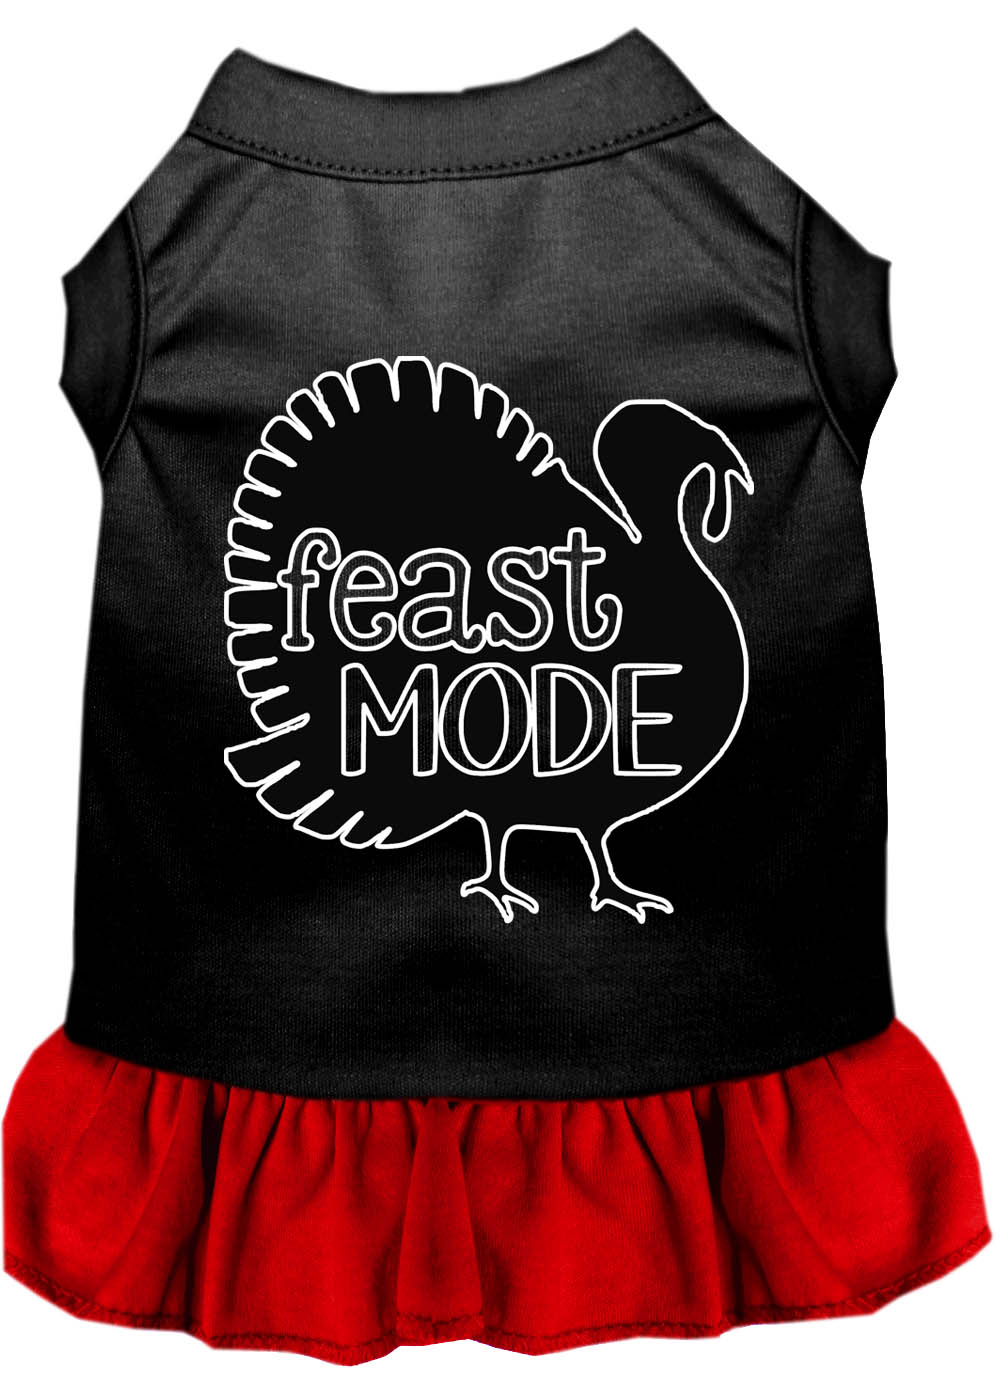 Feast Mode Screen Print Dog Dress Black with Red XL